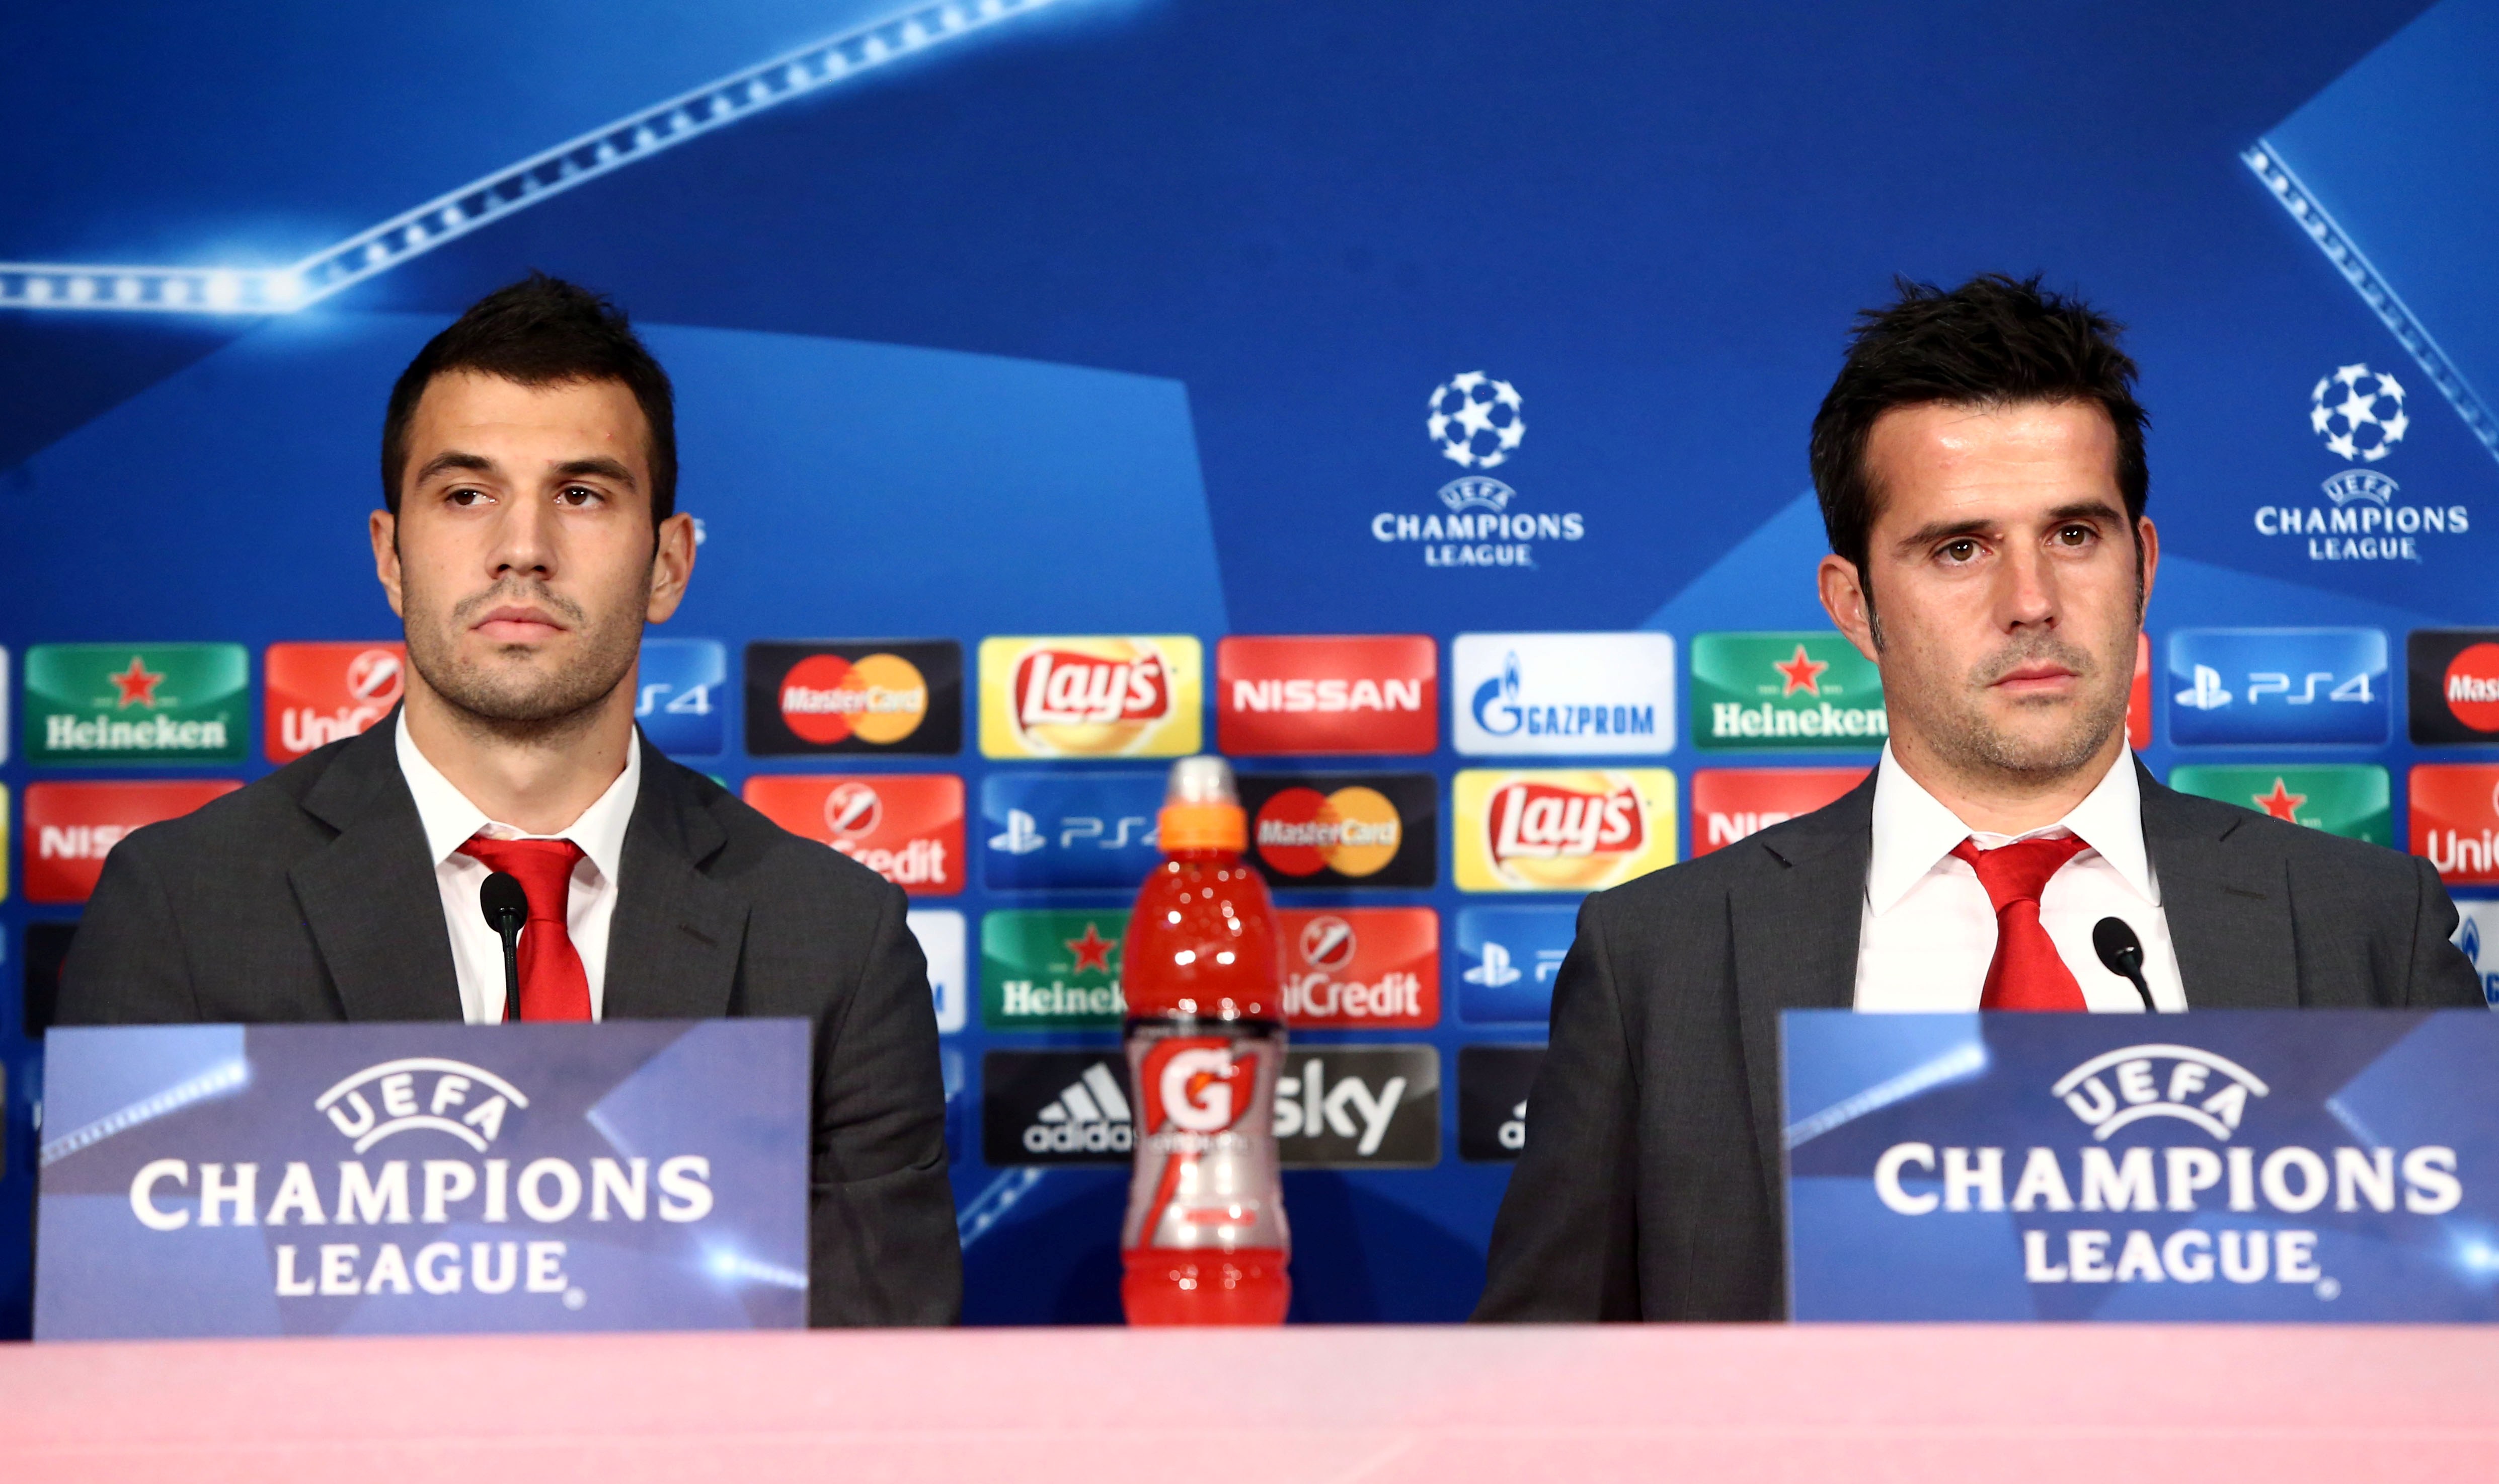 The press conference ahead of the match against Bayern